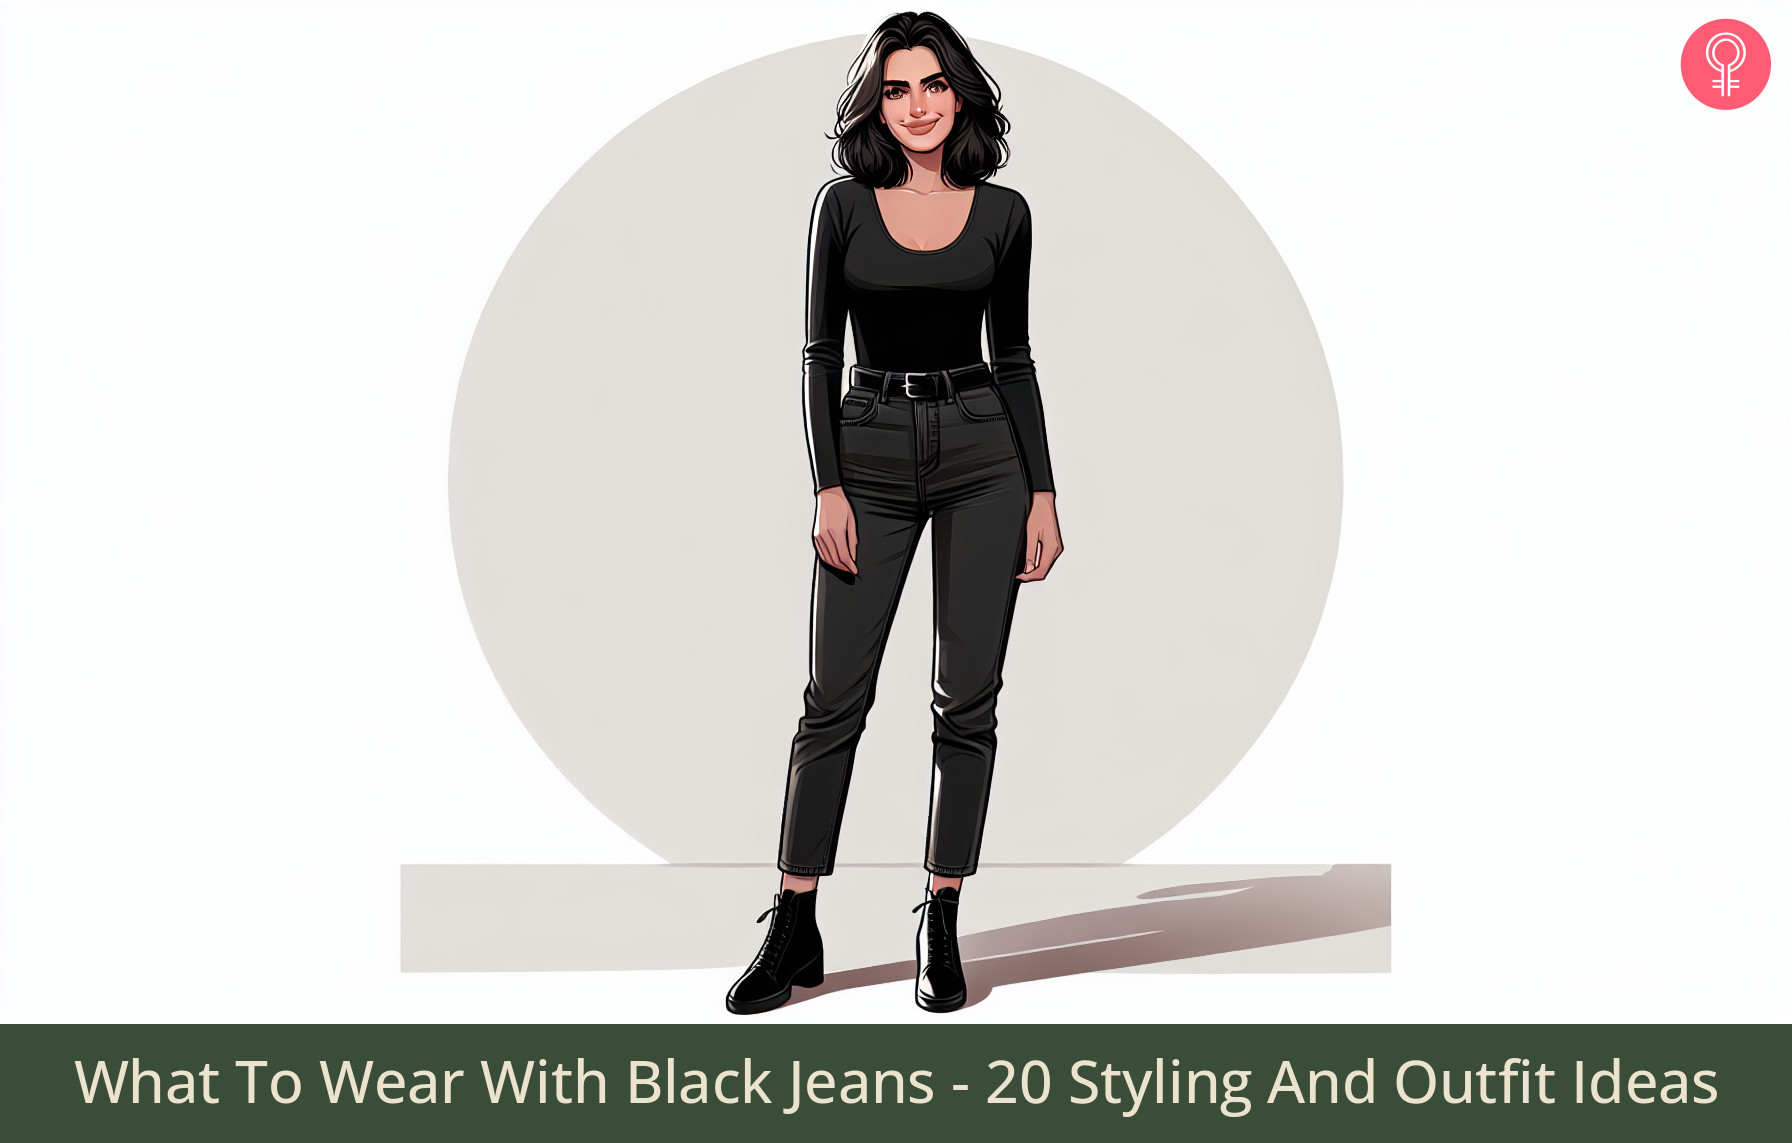 what to wear with black jeans